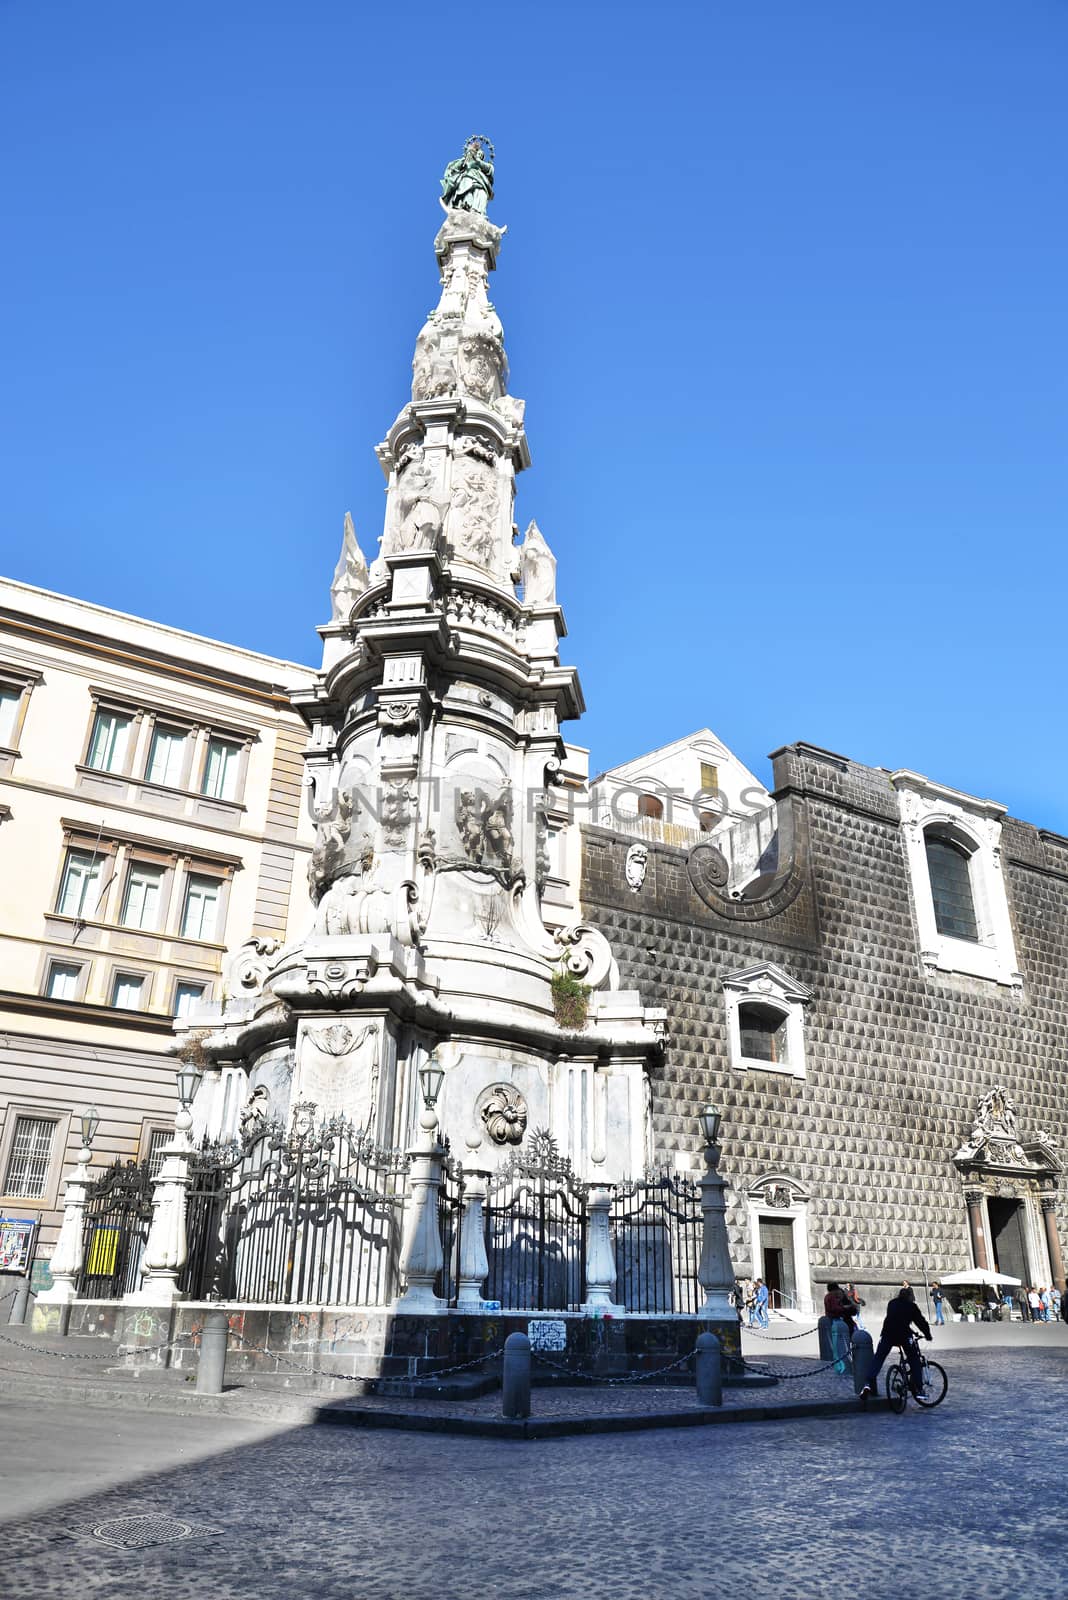 NAPLES - NOVEMBER 1: Piazza del Gesu and the facade of the main church on November 1, 2014 in Naples, Italy